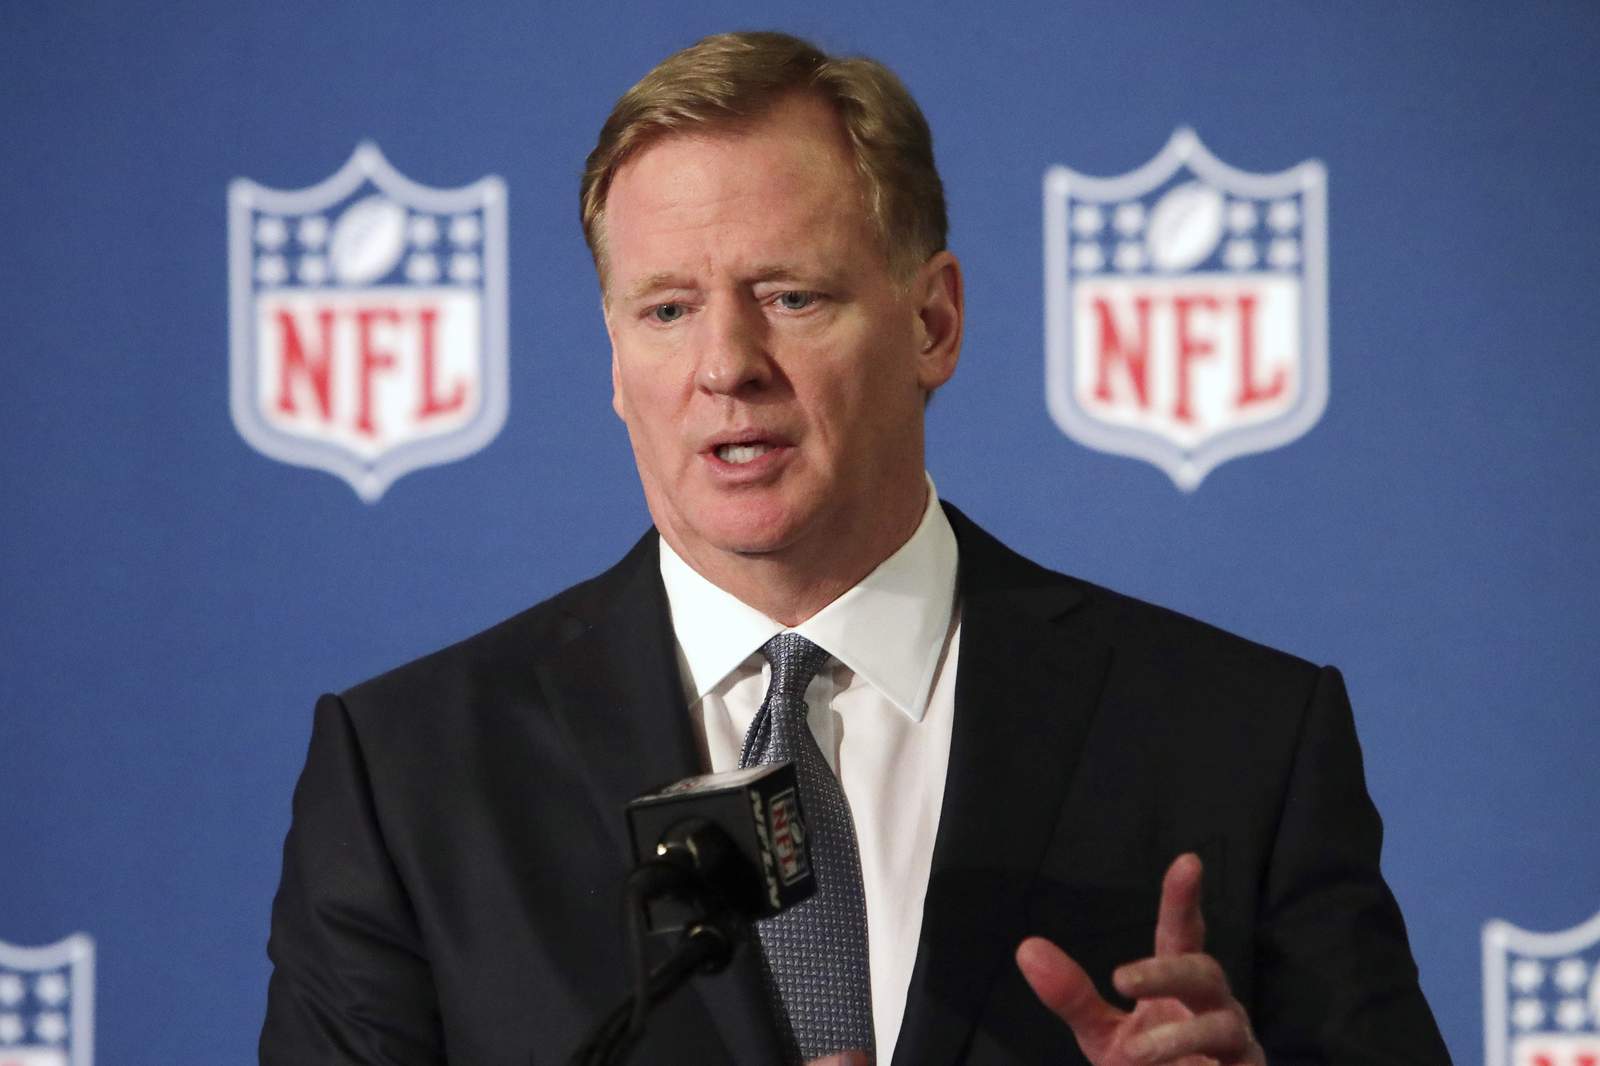 NFL plans to observe Juneteenth as league holiday